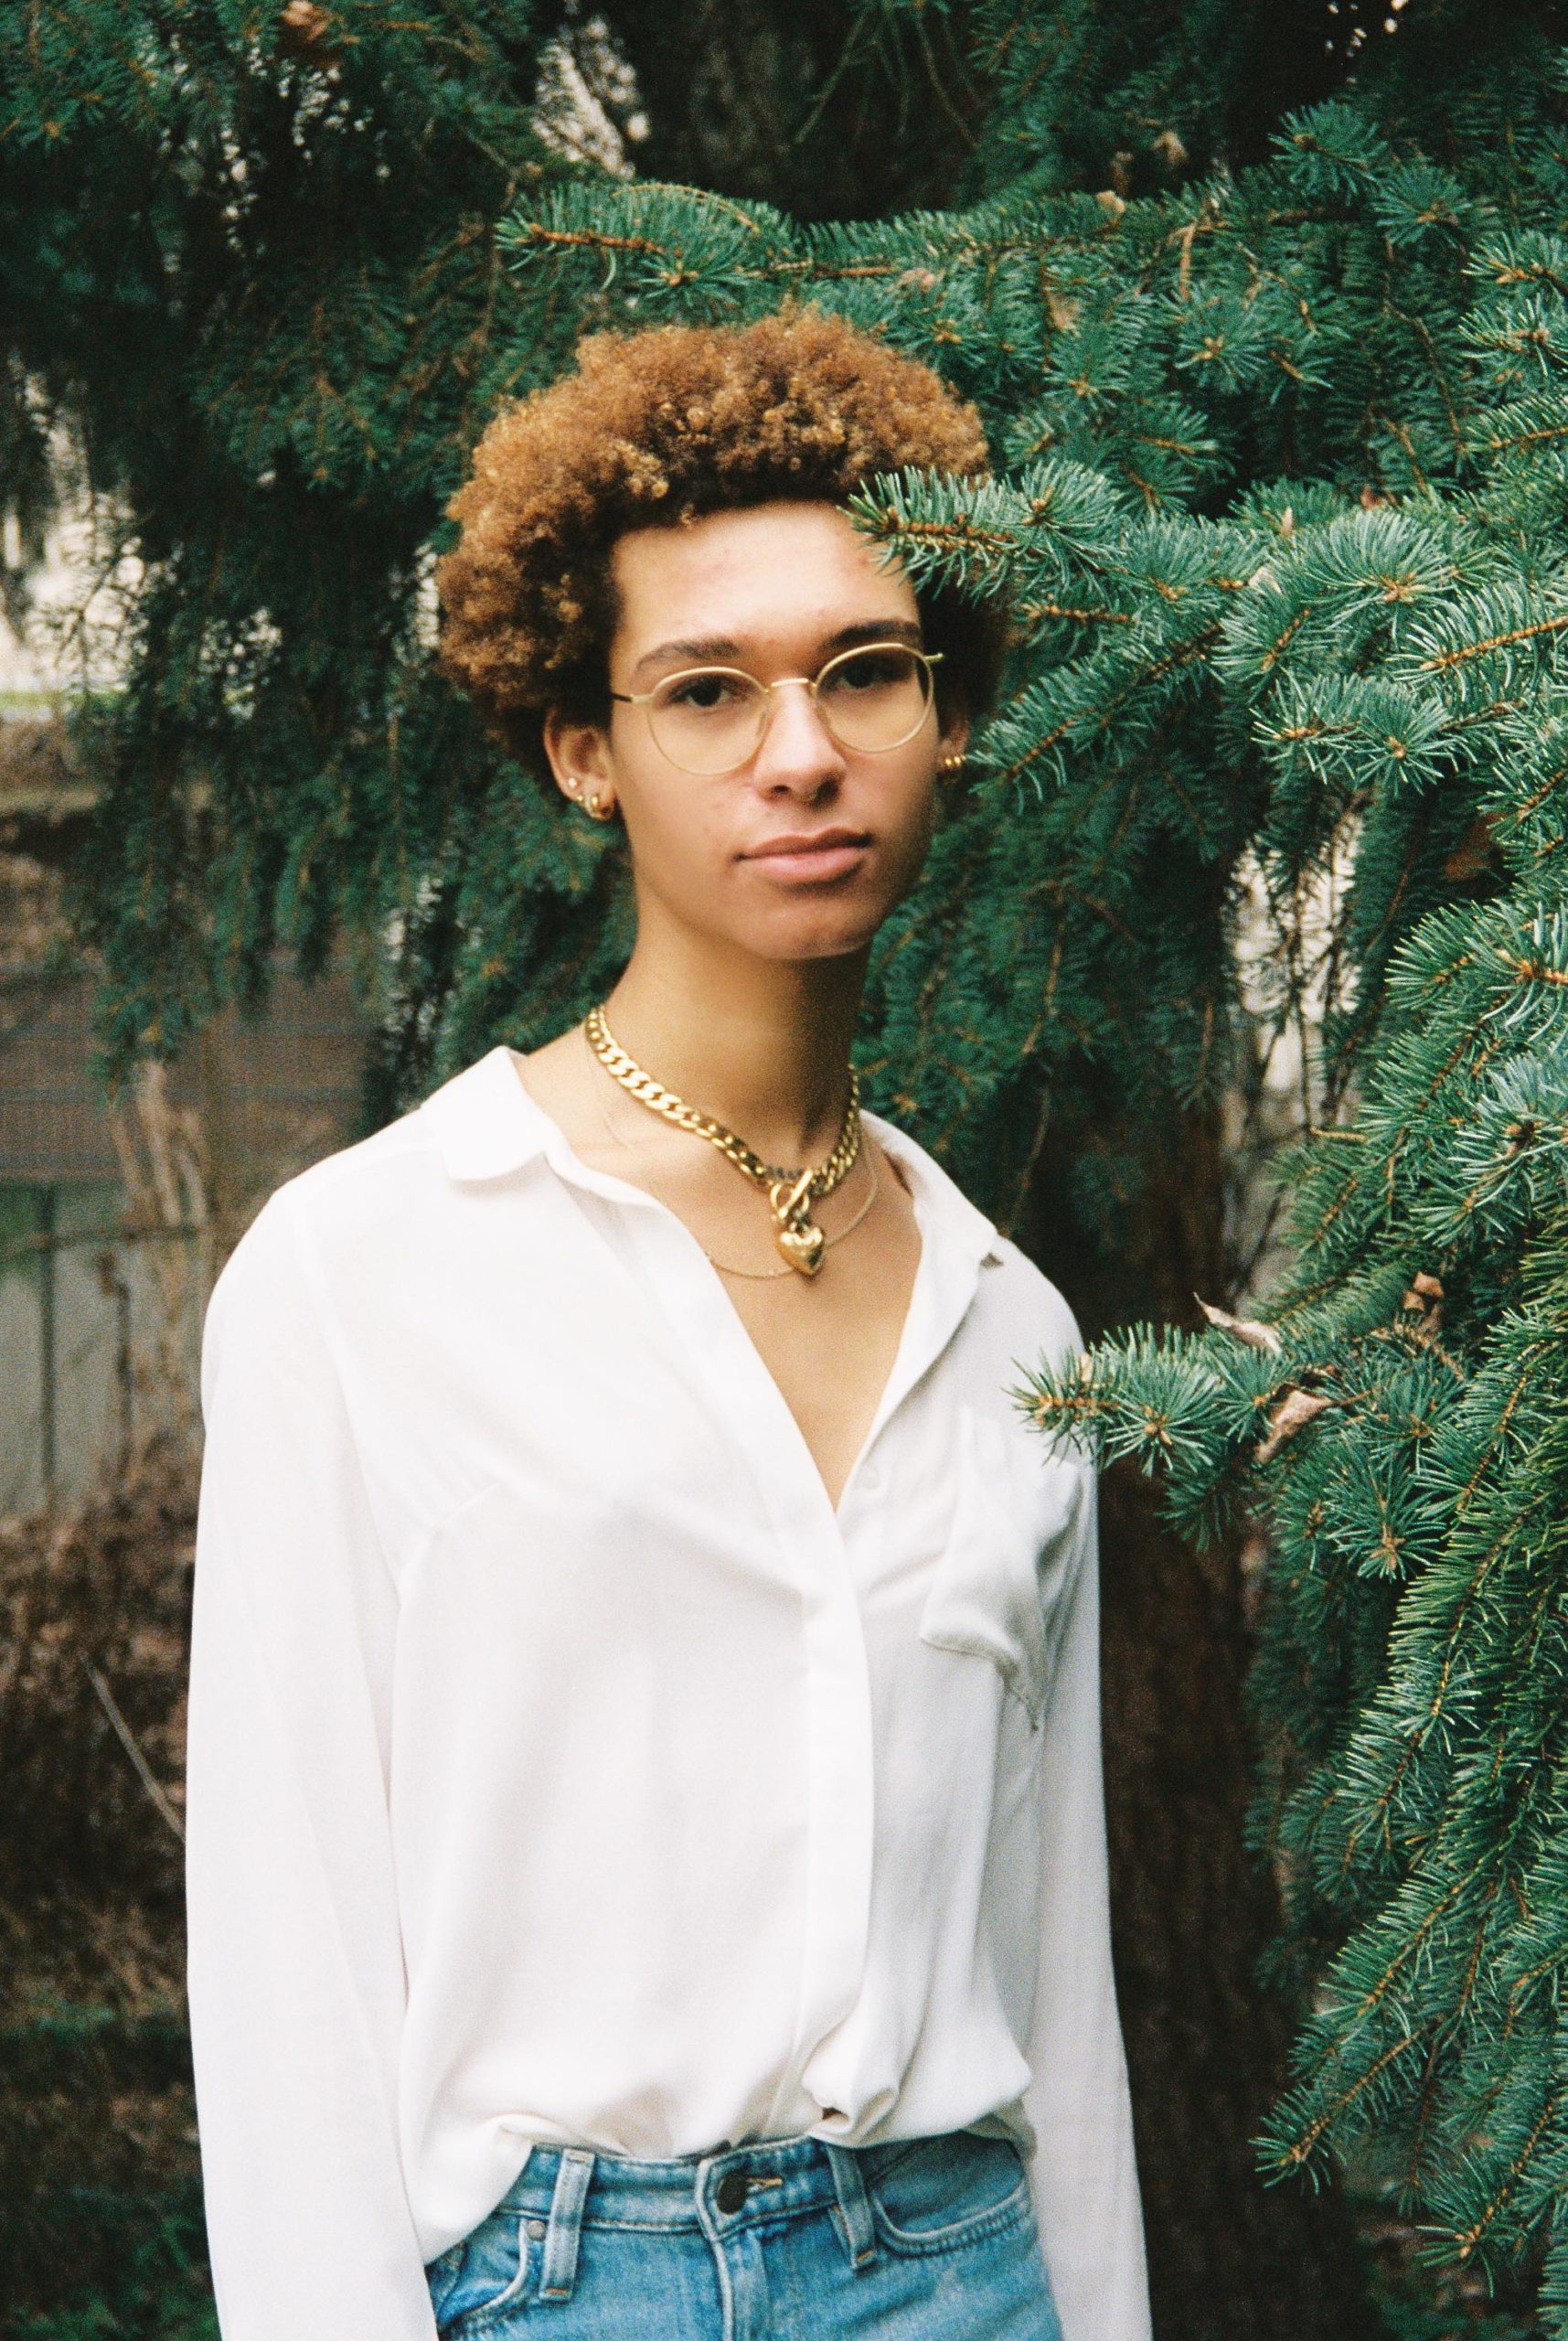 Glasgow music producer and DJ TAAHLIAH has organised a Black Lives Matter protest. <br><strong>Image credit:</strong> Cameron Bond<br>” /><span class=